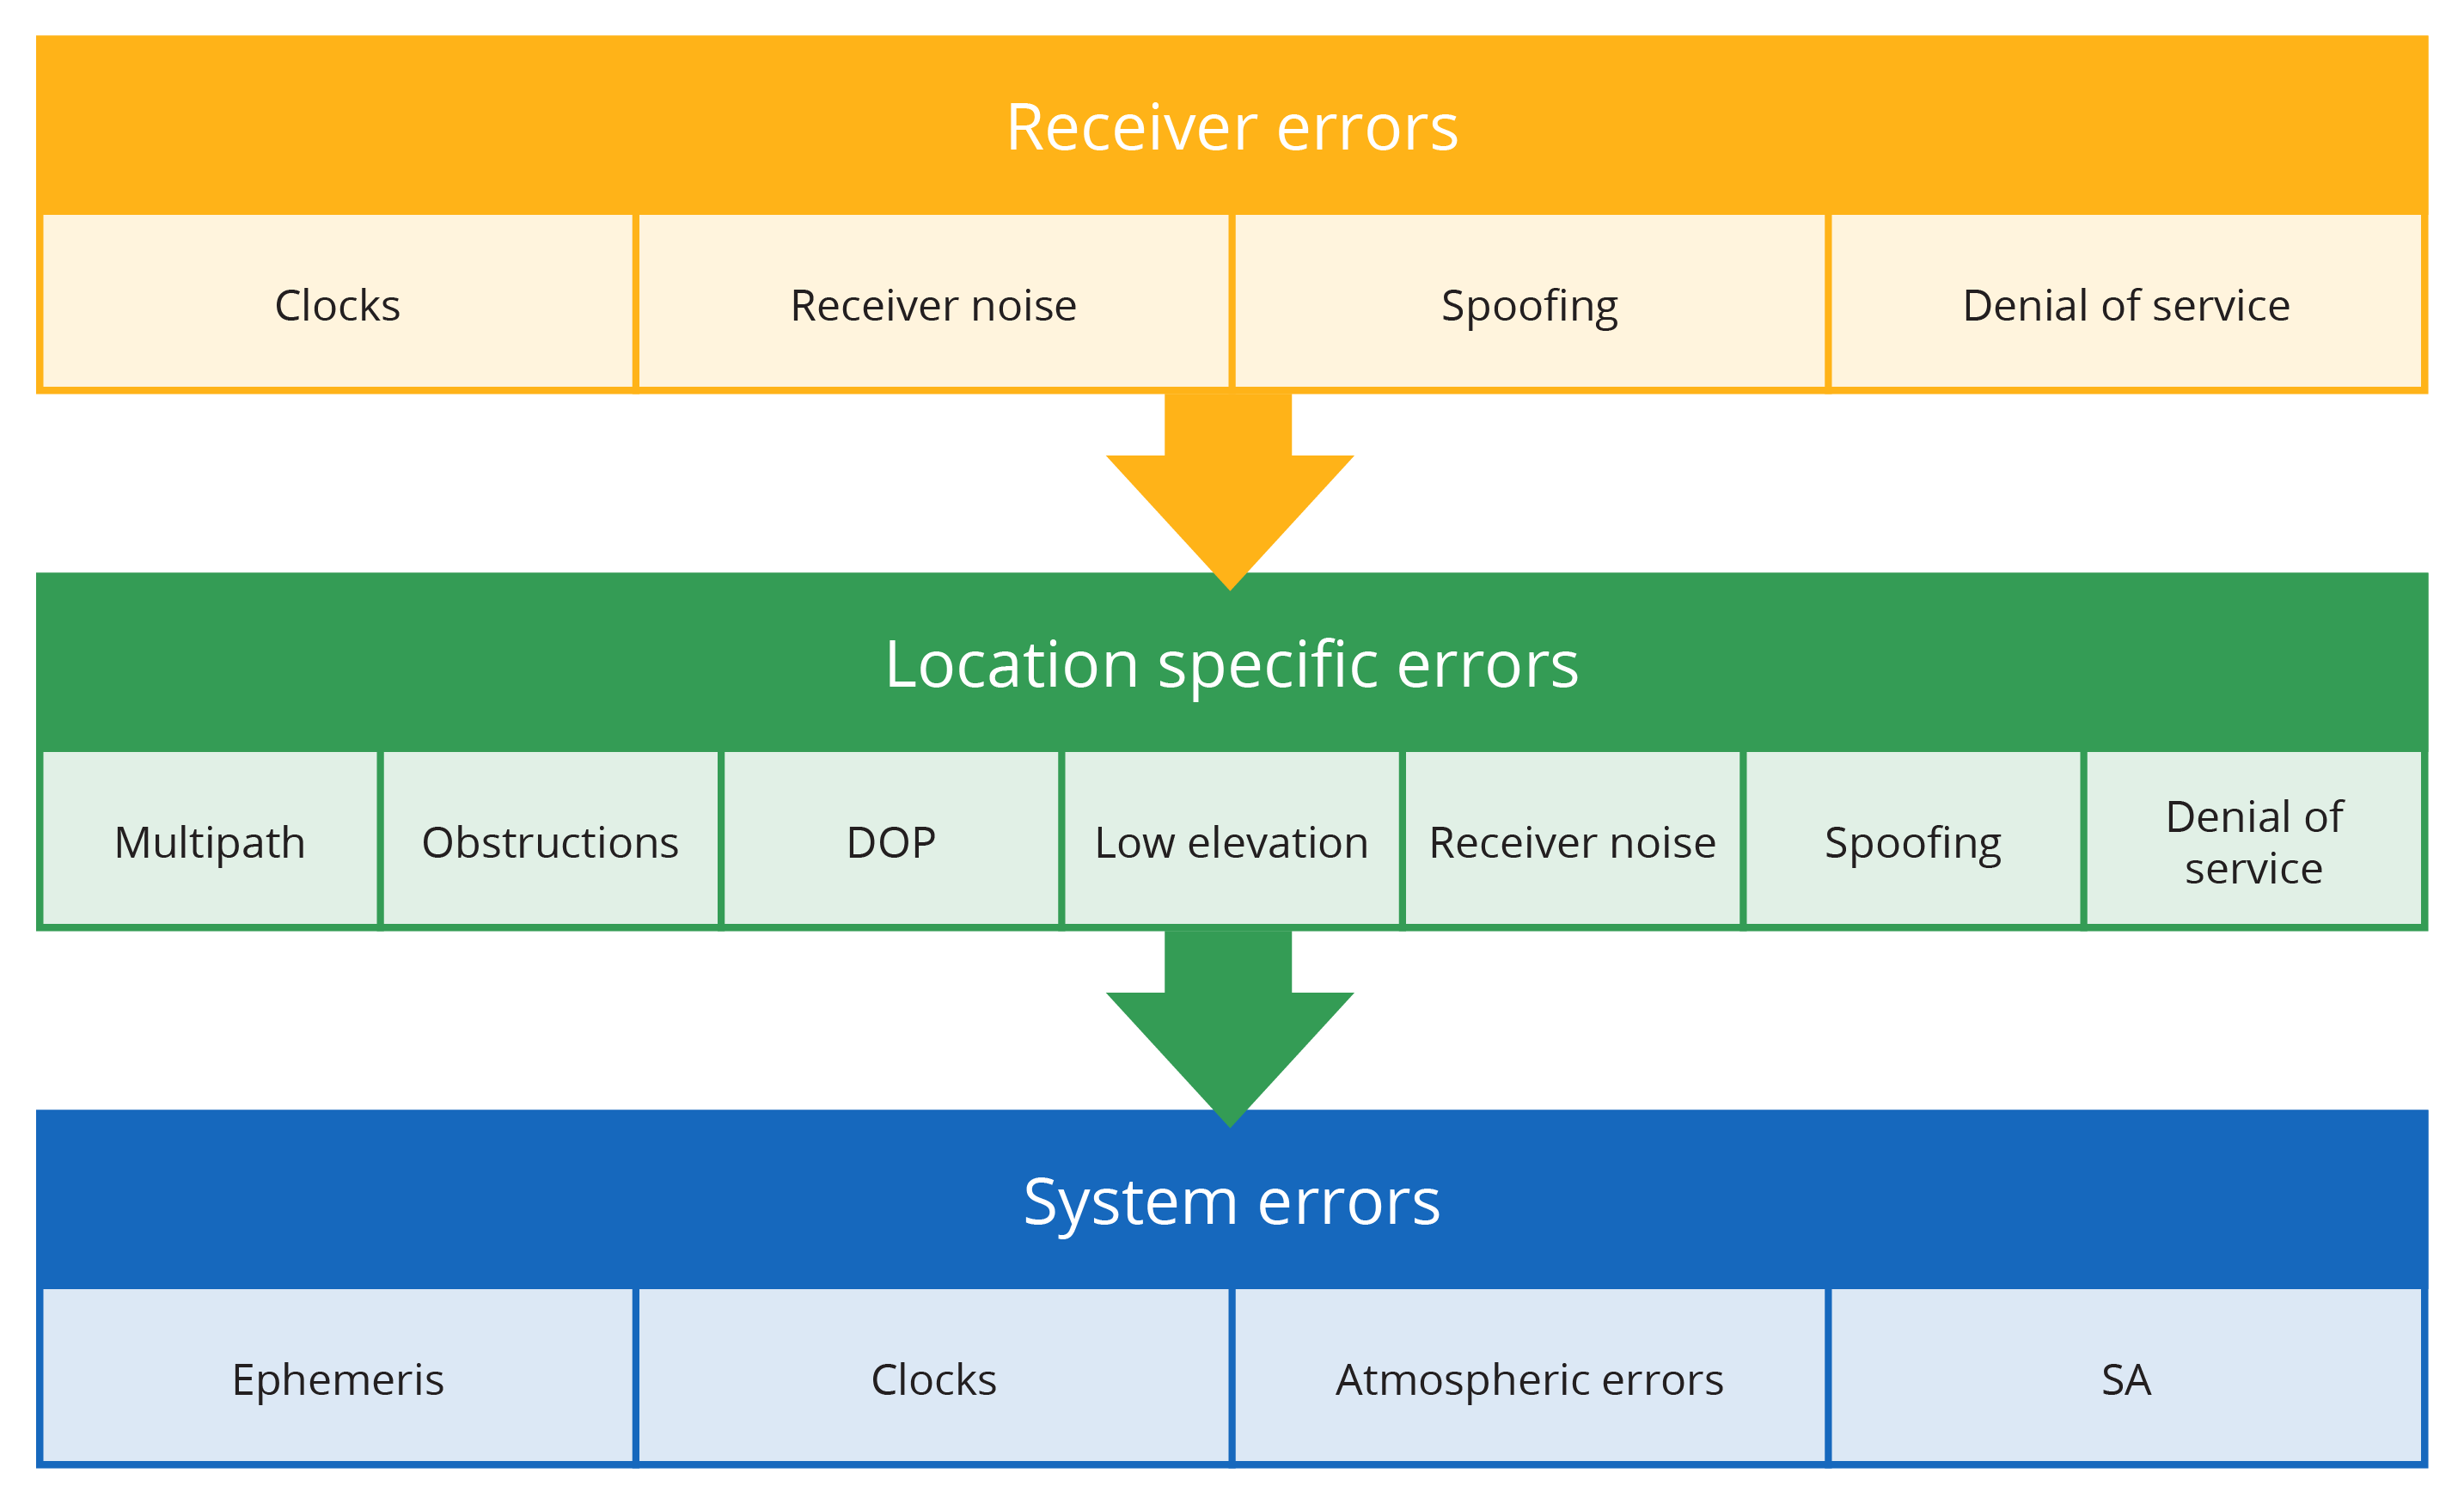 Diagram showing receiver errors, location specific factors and system errors. Receiver errors include clocks, receiver noise, spoofing and denial of service. Location specific errors include multipath, obstructions, DOP, low elevation, receiver noise, spoofing and denial of service. System errors include ephemeris, clocks, atmospheric errors and SA.